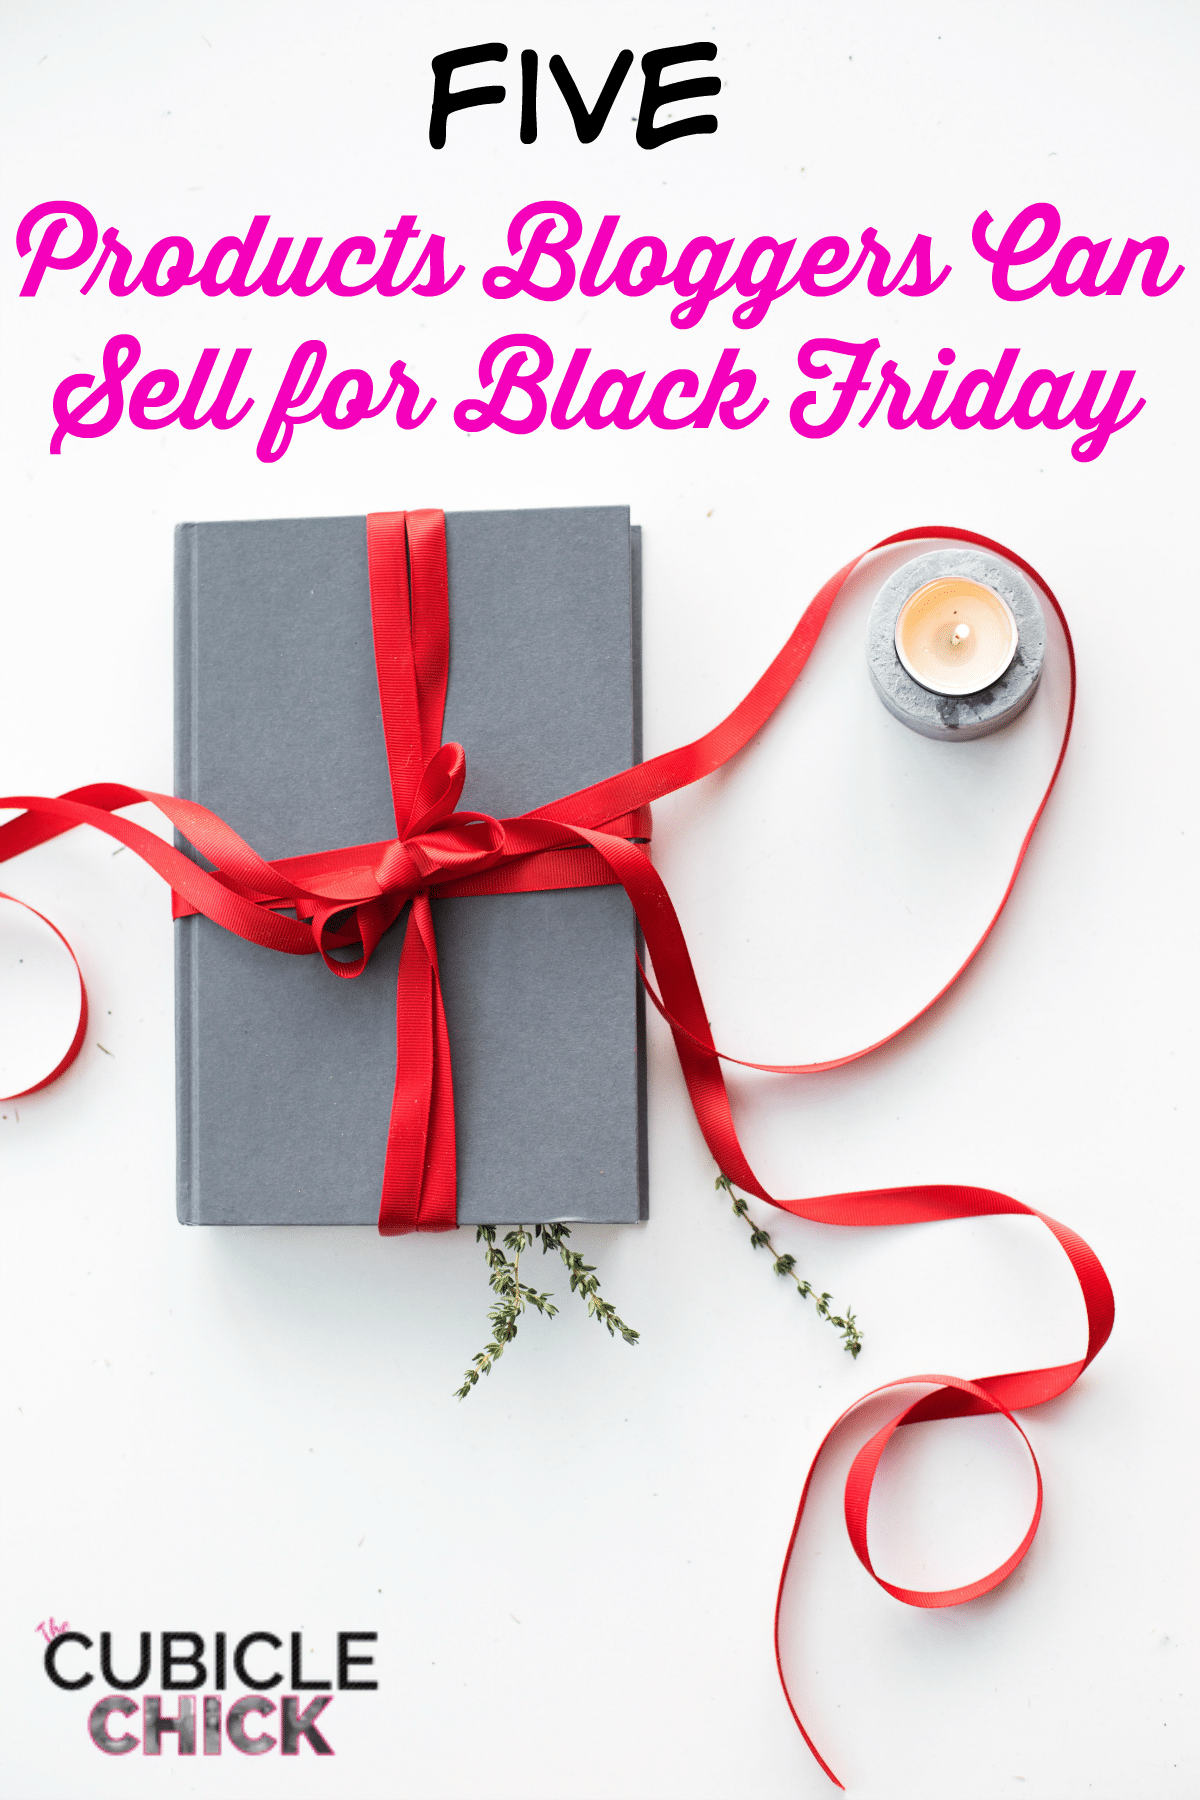 If you are a blogger and don't have anything to sell for Black Friday, what are you waiting for? Here's five quick products that you can create ASAP.